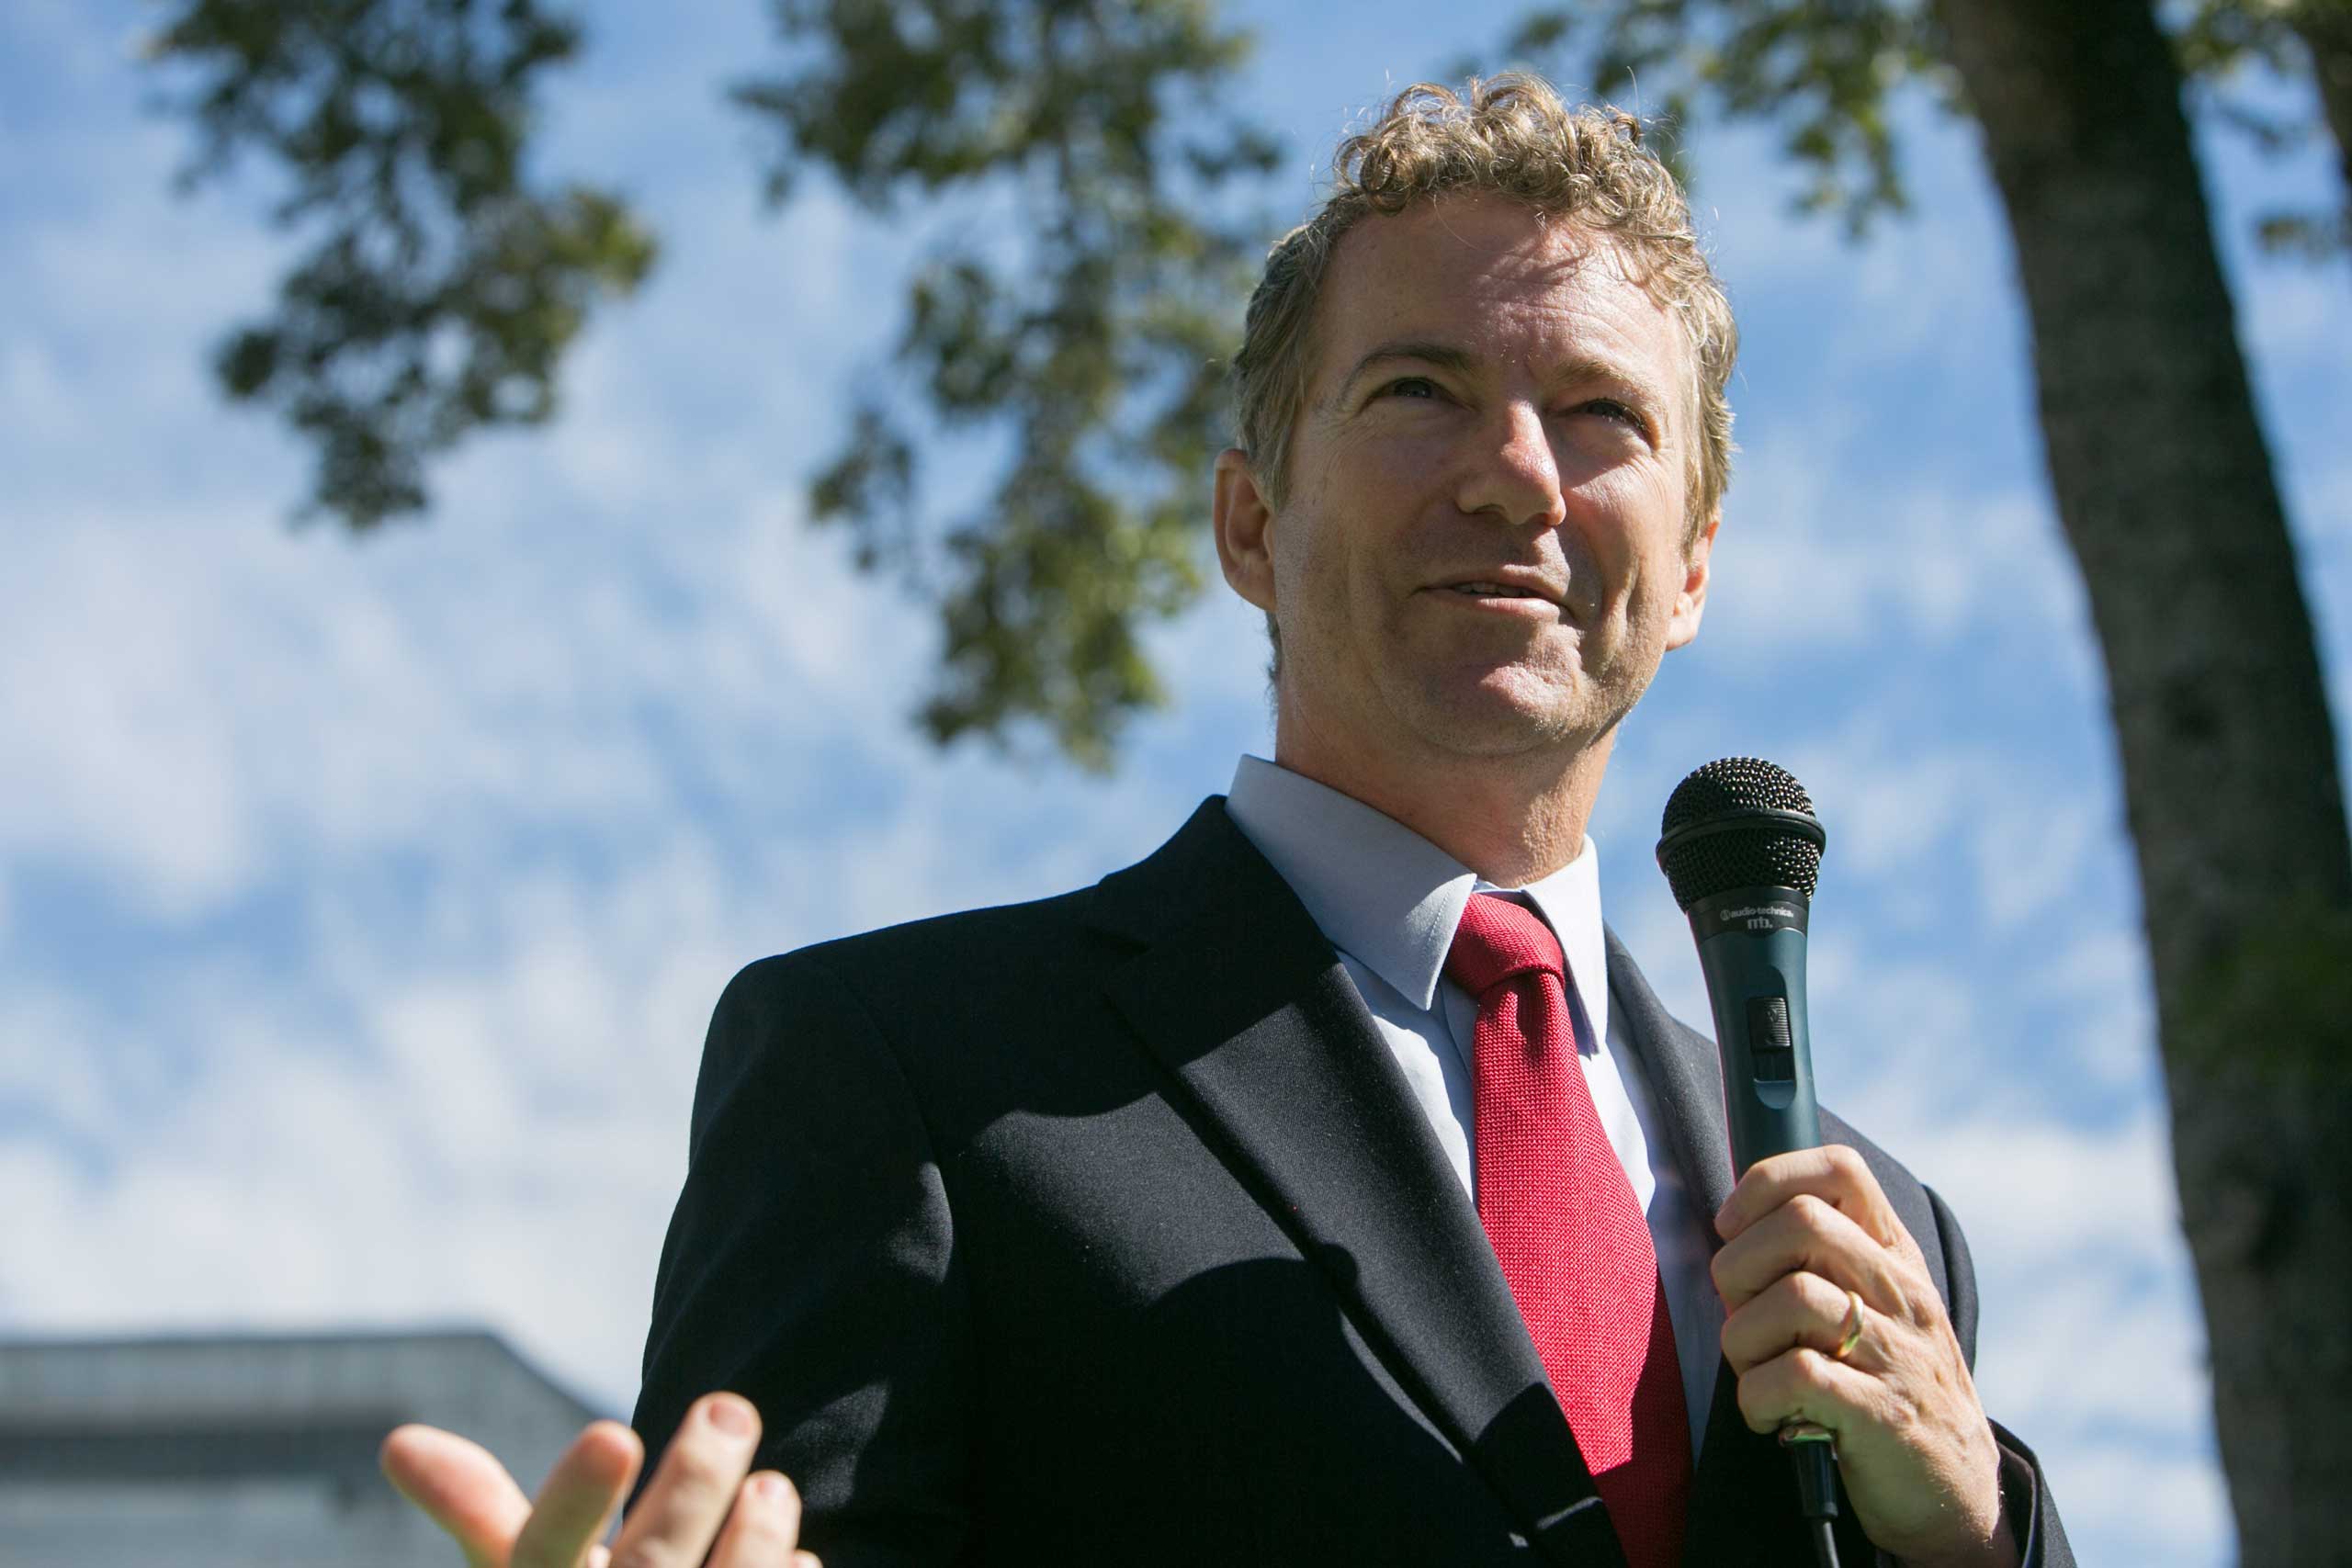 Sen. Rand Paul (R-KY) speaks to an audience of supporters of Georgia Senate candidate David Perdue during a campaign stop in McDonough, Ga. on Oct. 24, 2014. (Jessica McGowan—Getty Images)